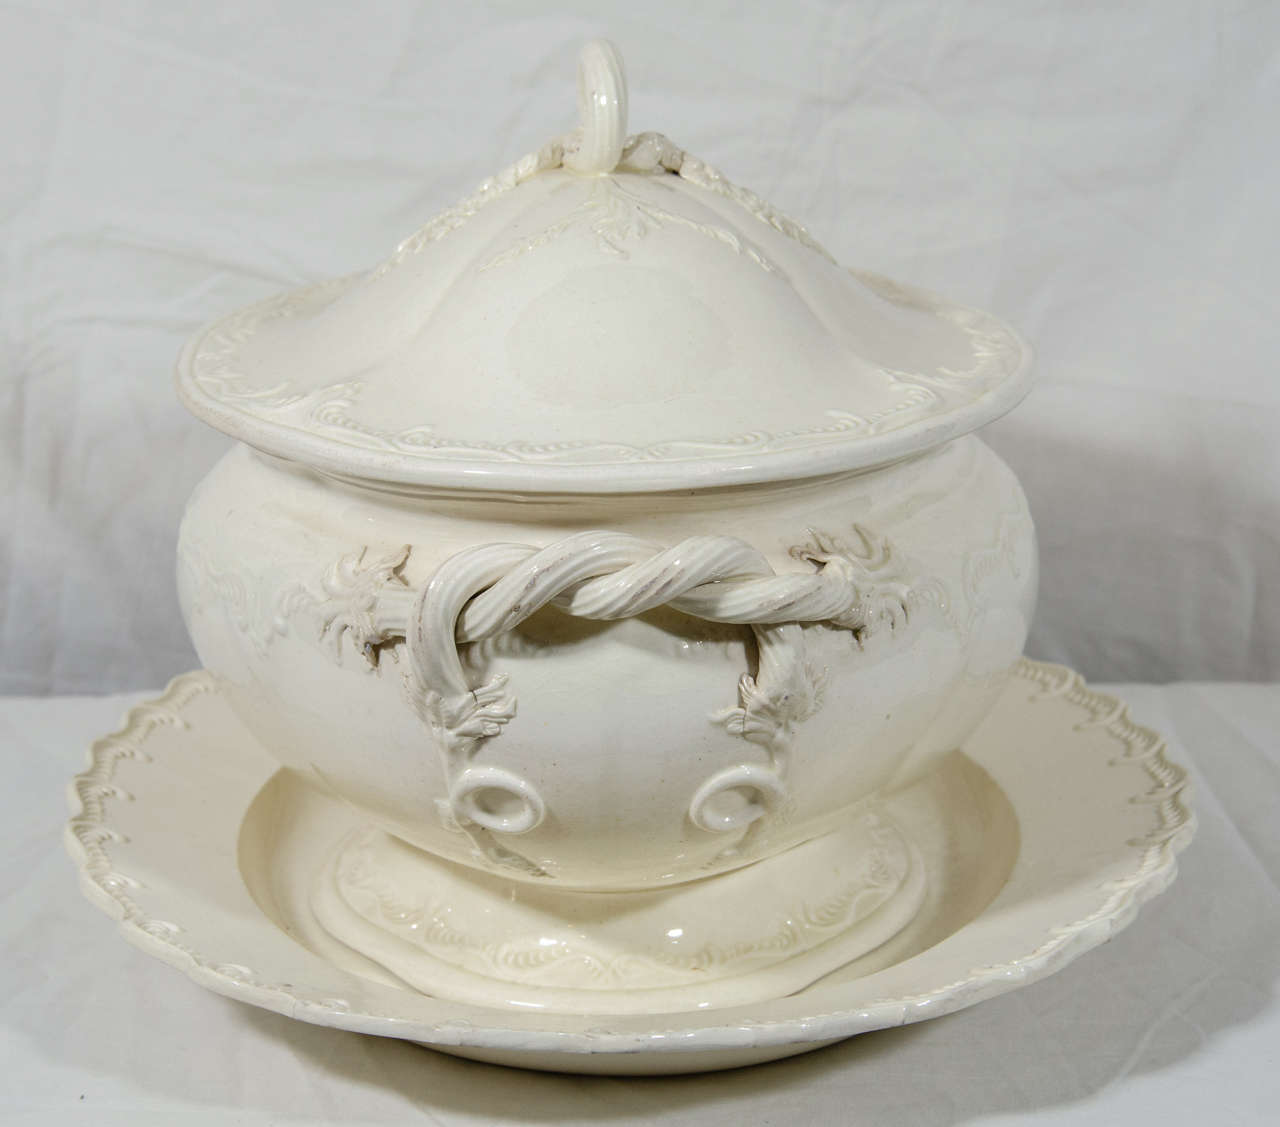 An exceptional 18th century creamware soup tureen and original stand well-proportioned and decorated with crisply molded sprigged flowers, rope handles, a looped rope finial, and feather edge borders.